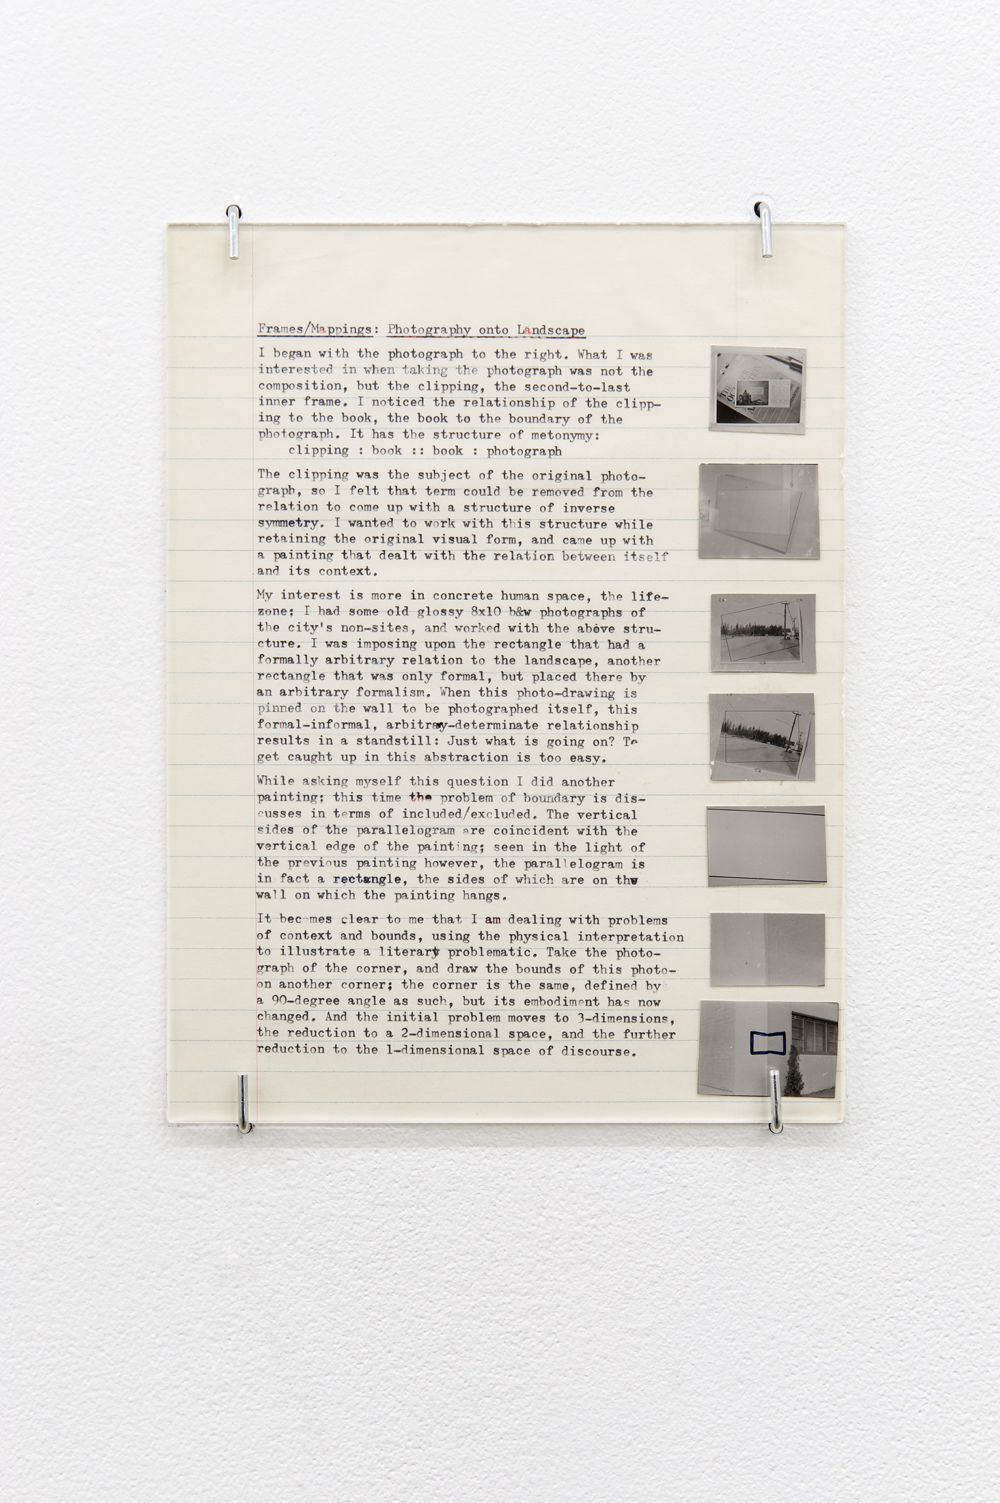 Robert Kleyn, Frames/Mappings: Photography onto Landscape, 1972, typescript, photographs on paper, 9 x 7 in. (23 x 18 cm)  ​ by 